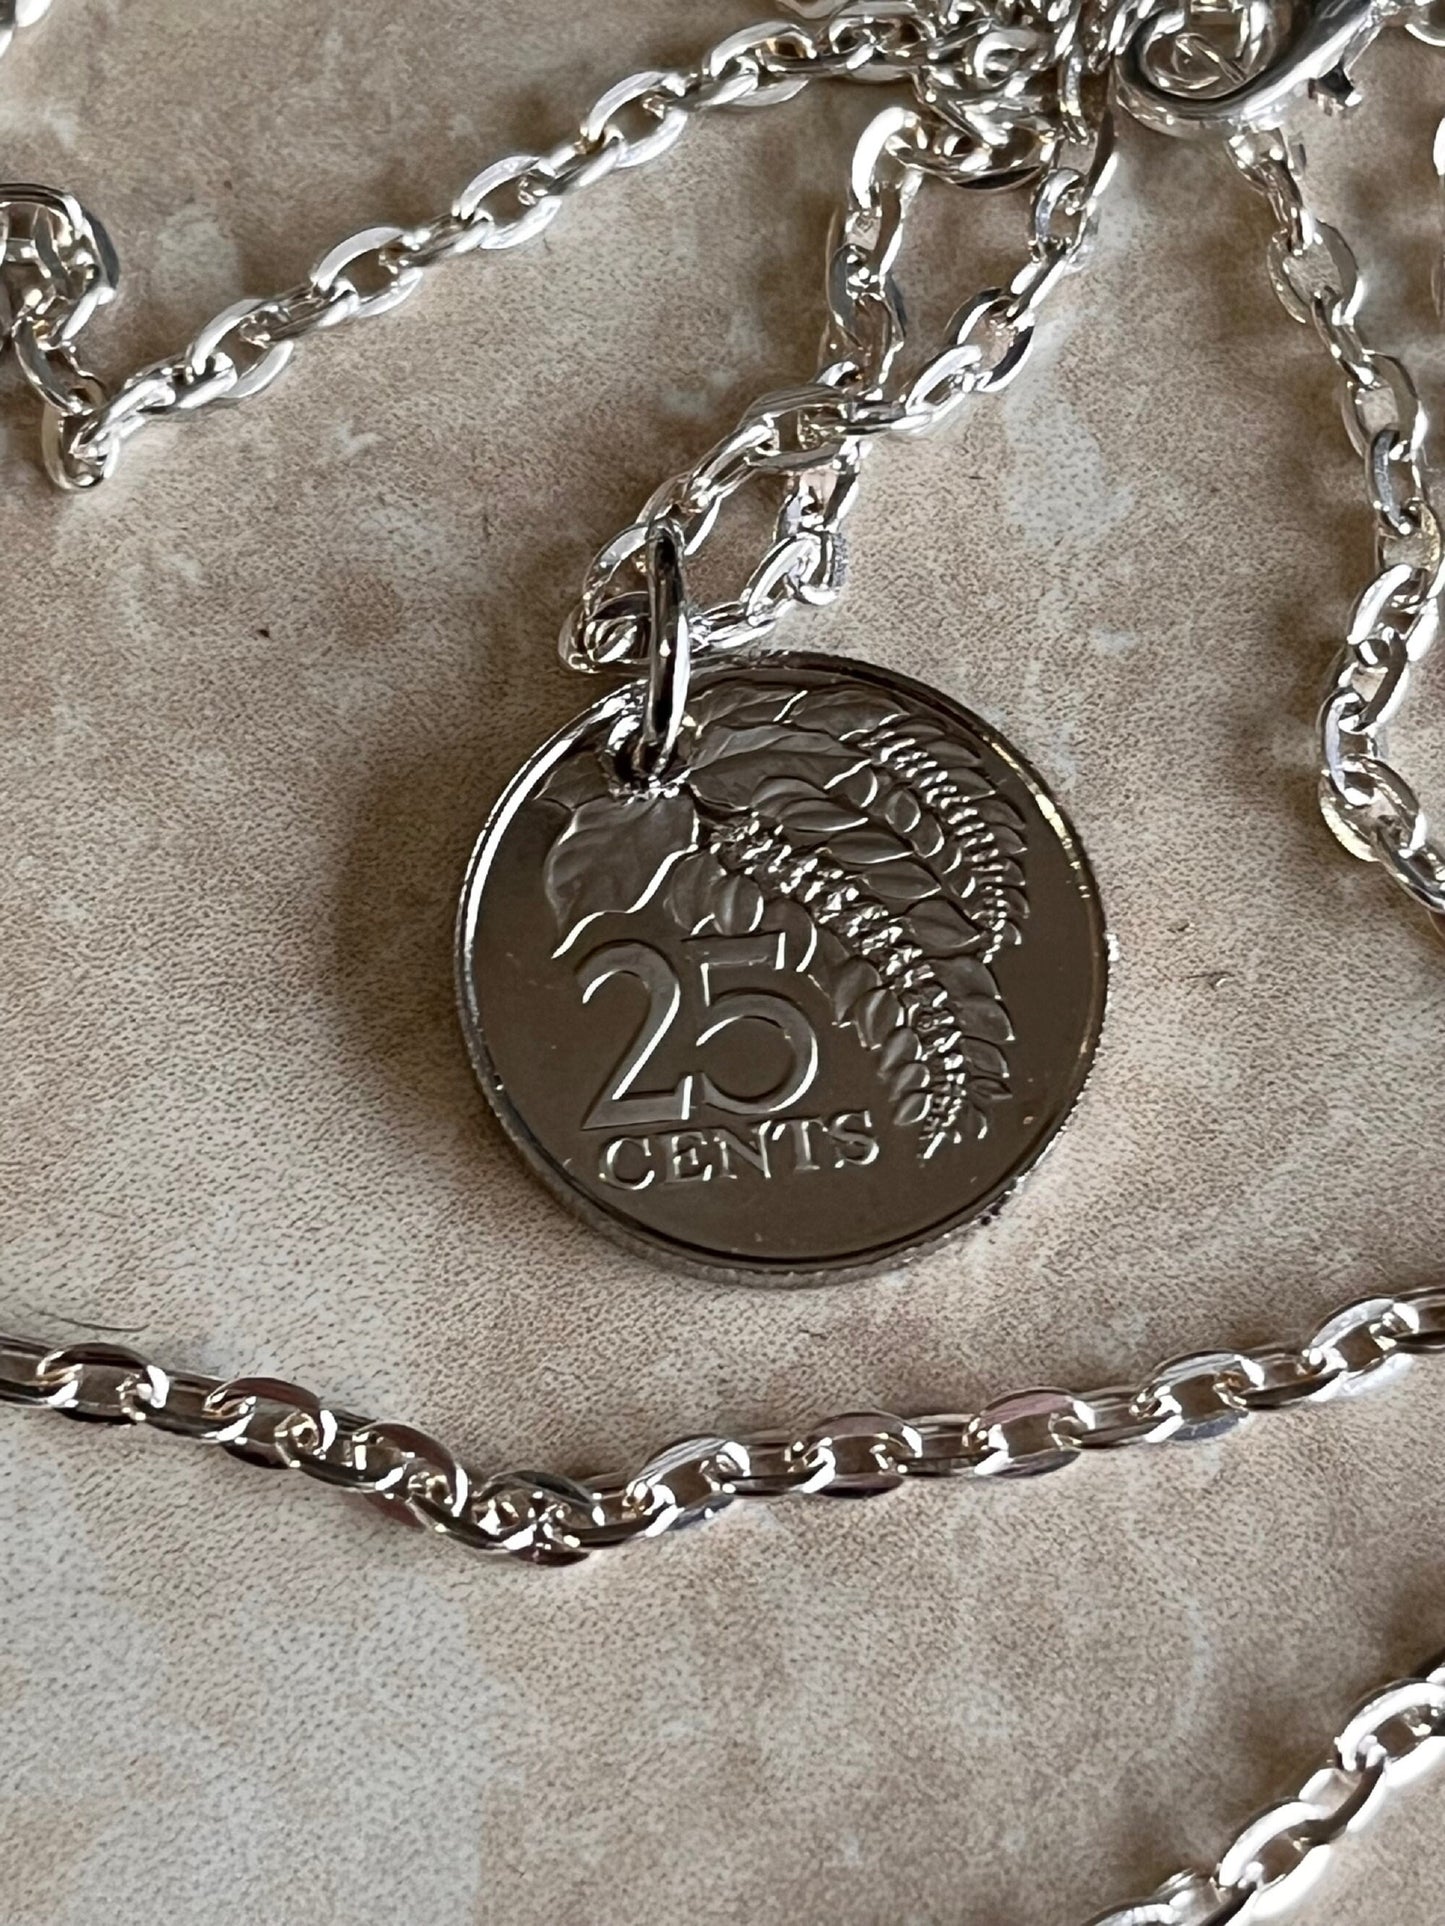 Trinidad and Tobago Mint Double Struck Coin Necklace 25 Cents Pendant Vintage Custom Made Coins Coin Enthusiast Fashion Accessory Handmade